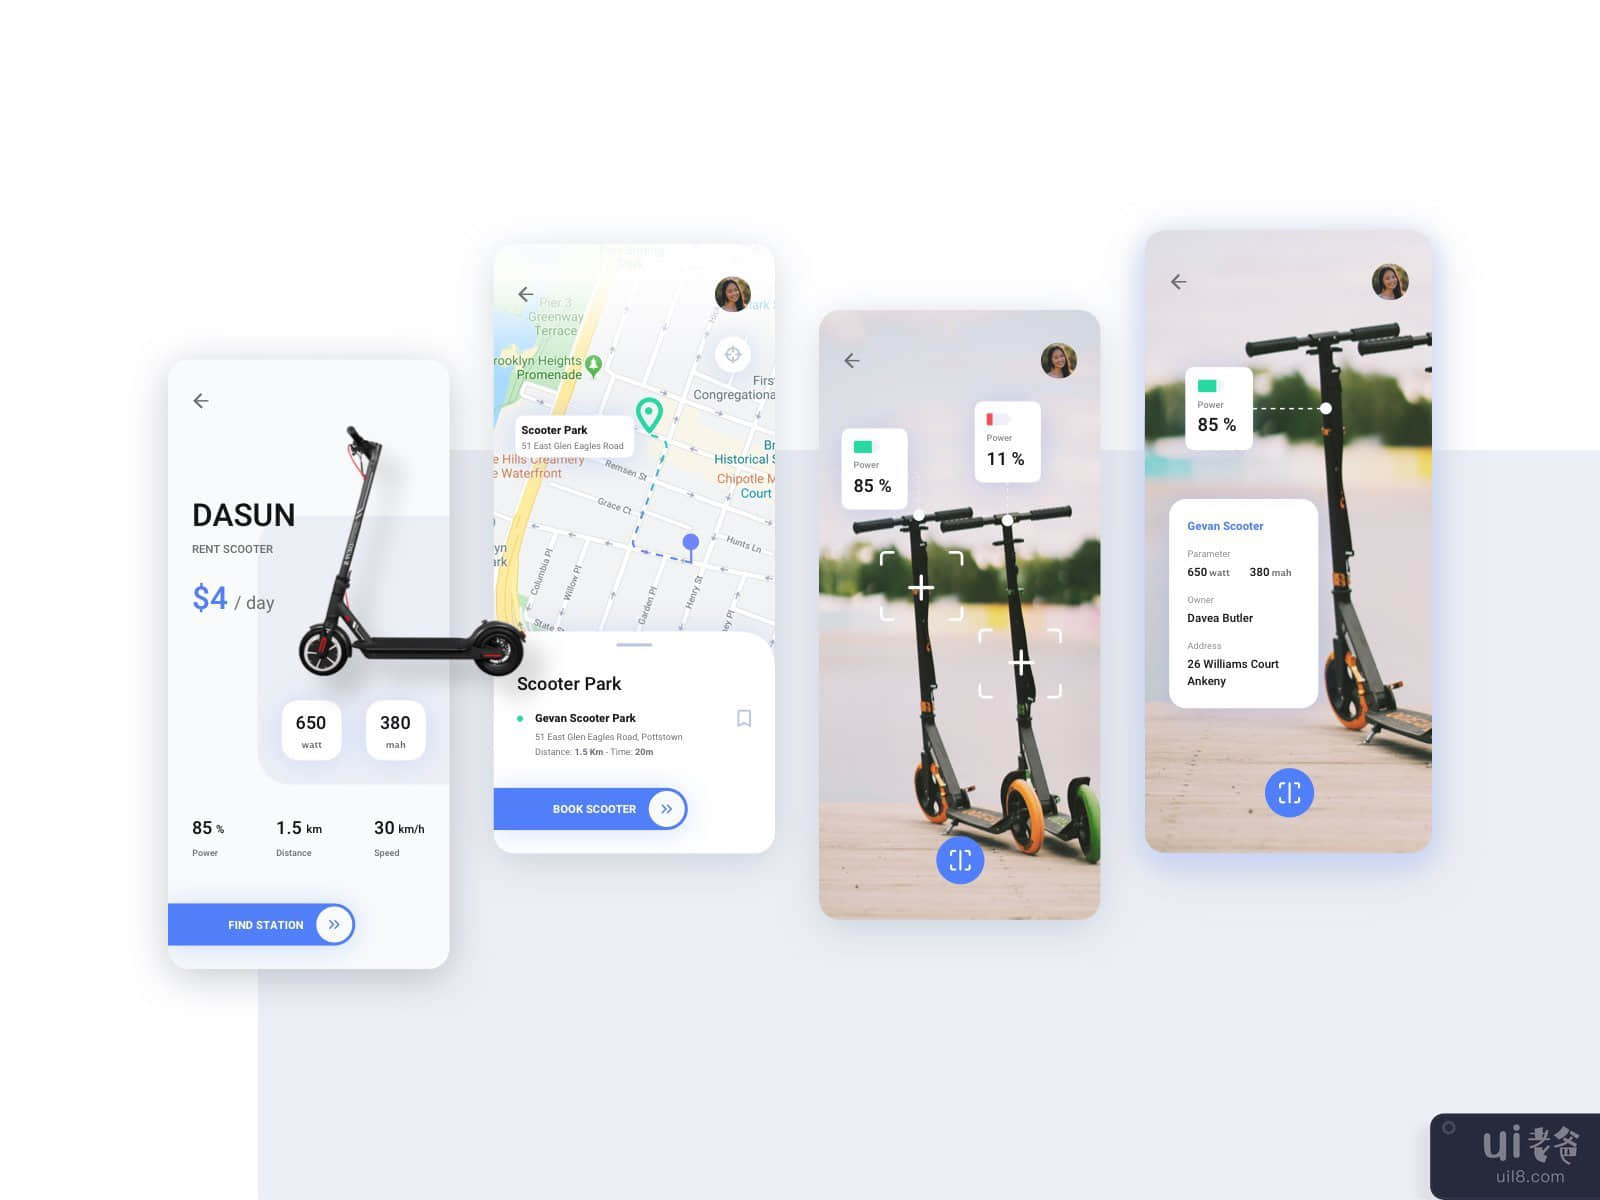 Rent Scooter Travel UI Kit	